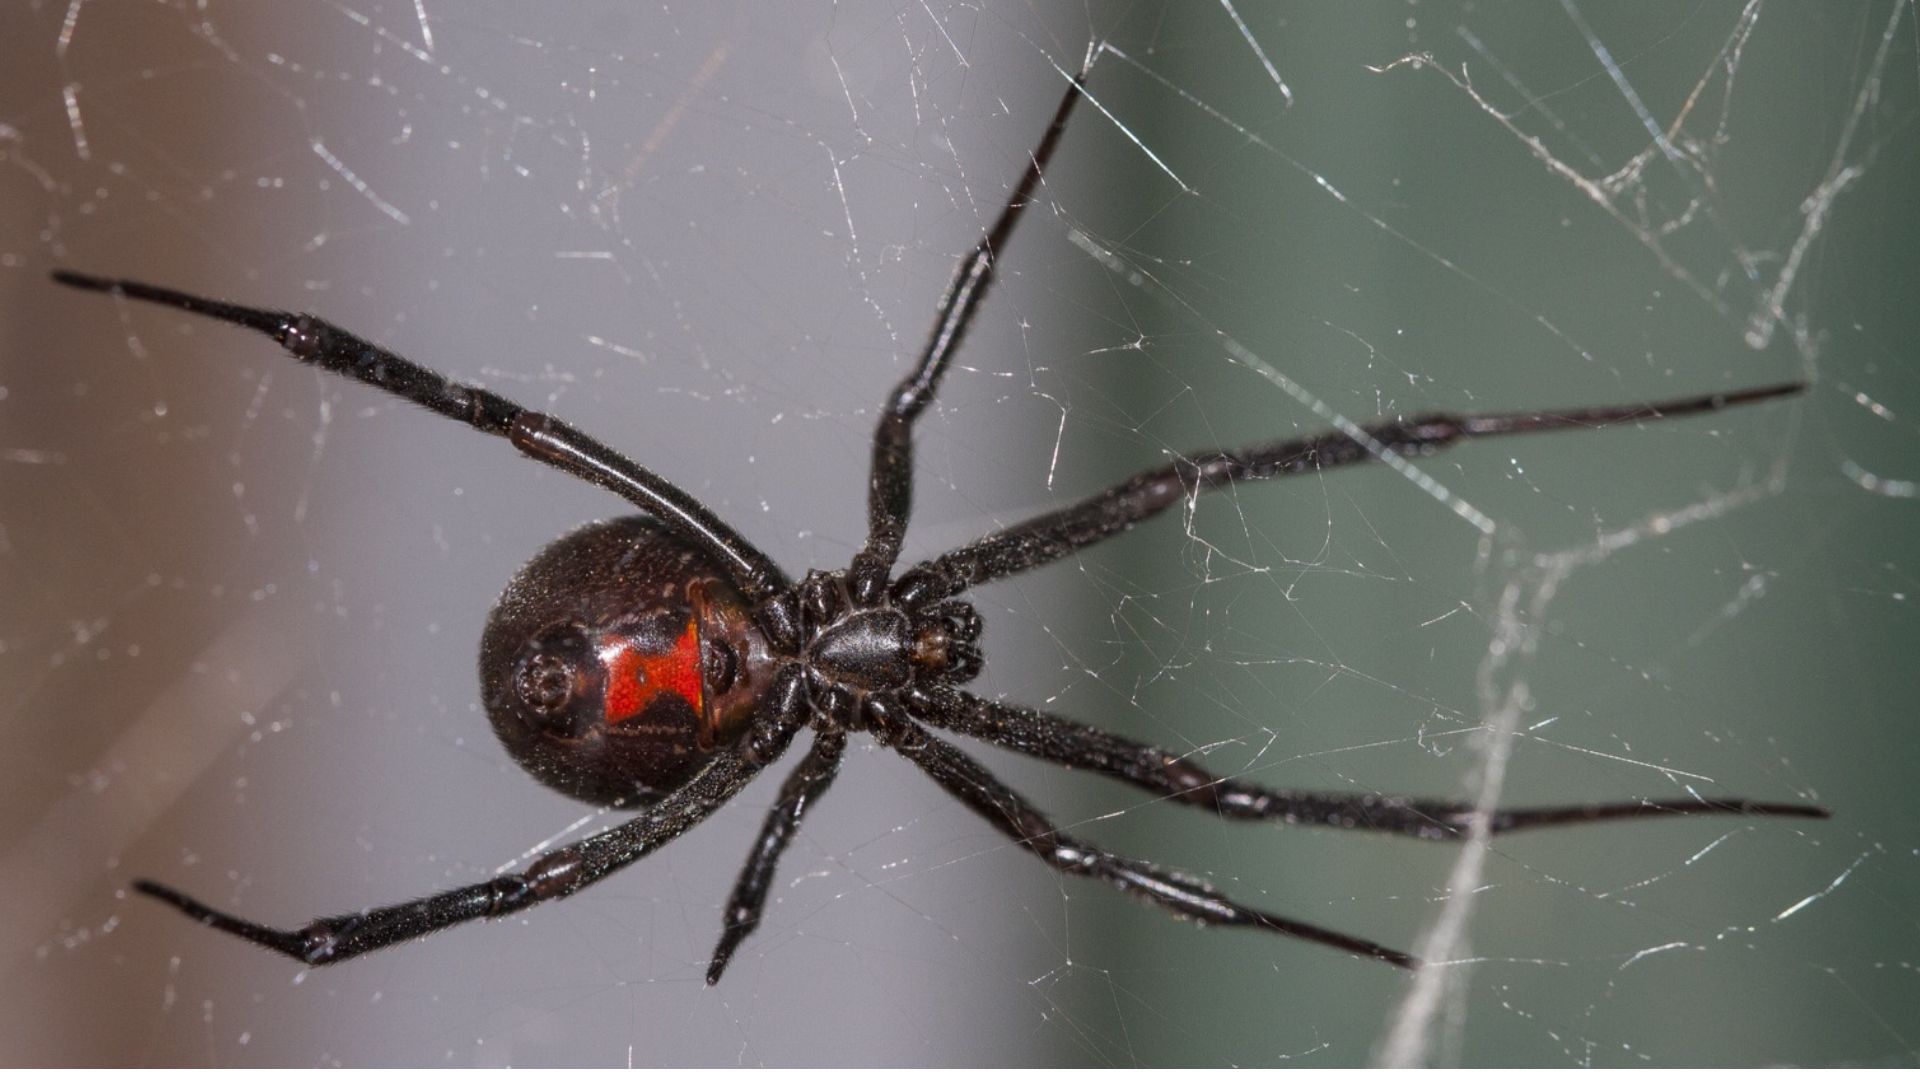 A Spider On Crawling On Its Web